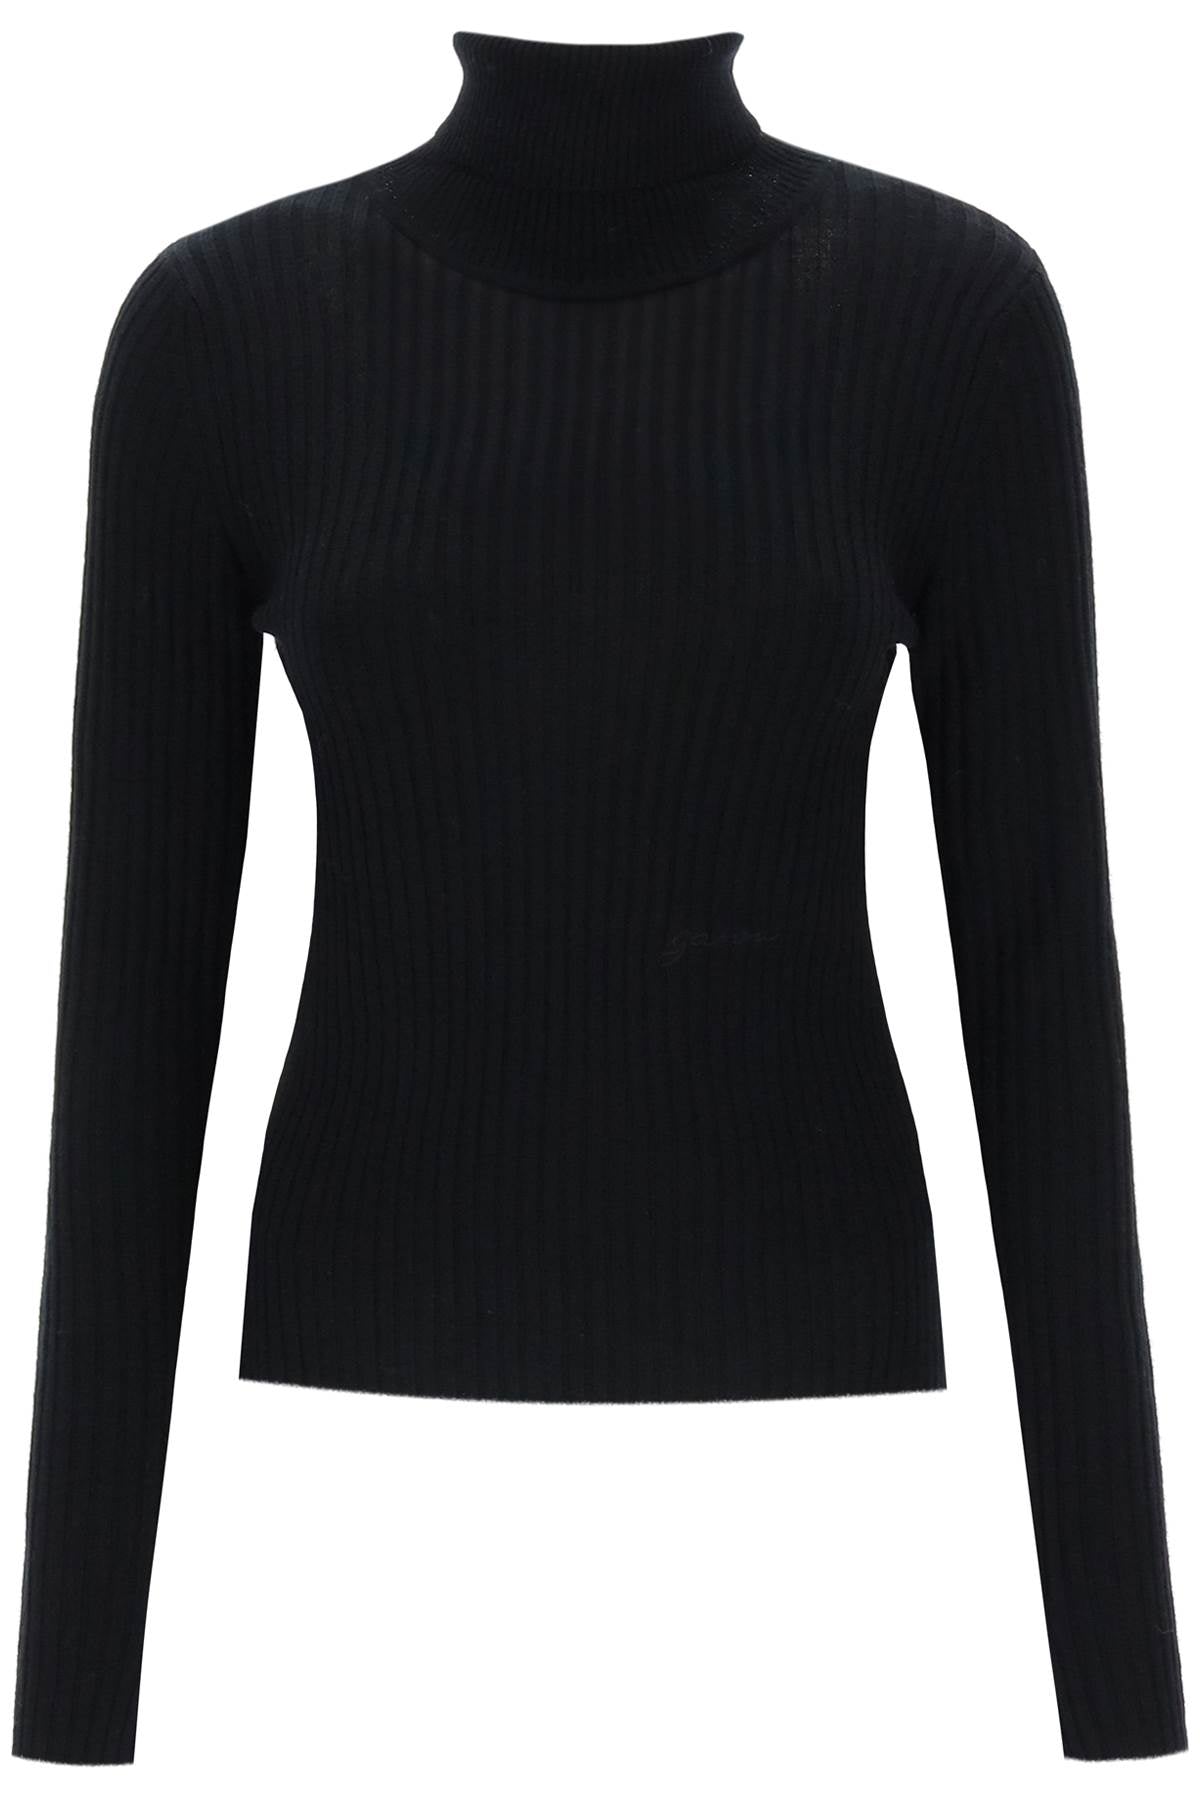 Ganni turtleneck sweater with back cut out-0